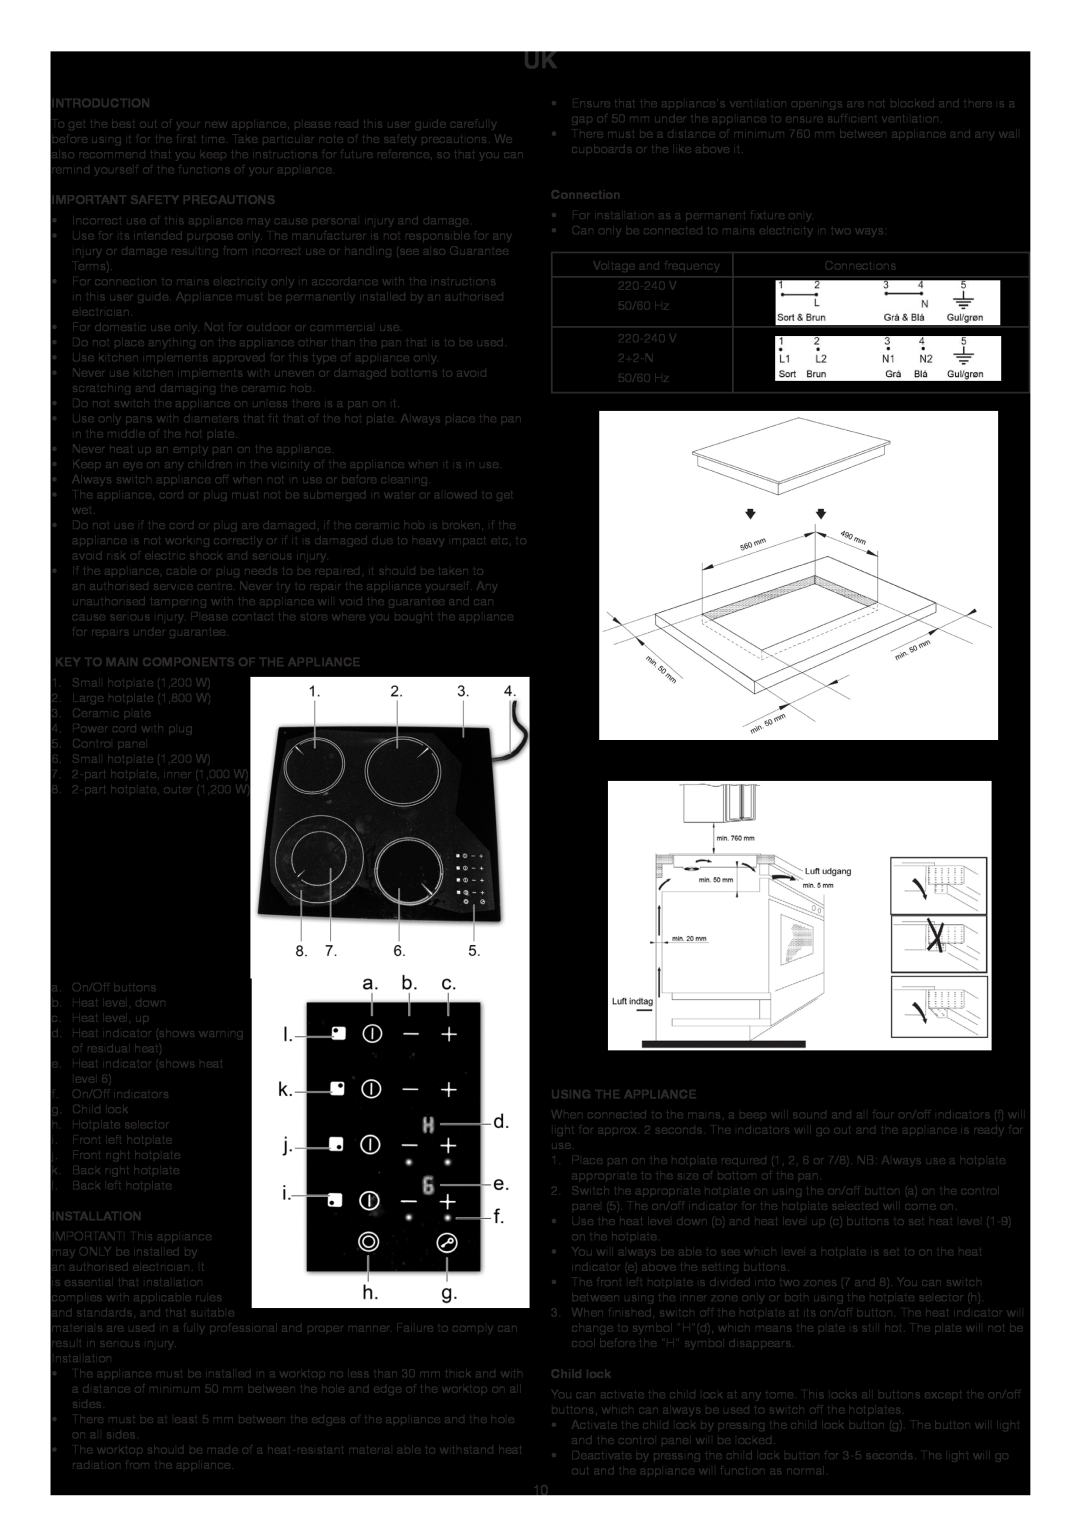 Melissa Hotplate manual Introduction, Important Safety Precautions, Key To Main Components Of The Appliance, Connection 